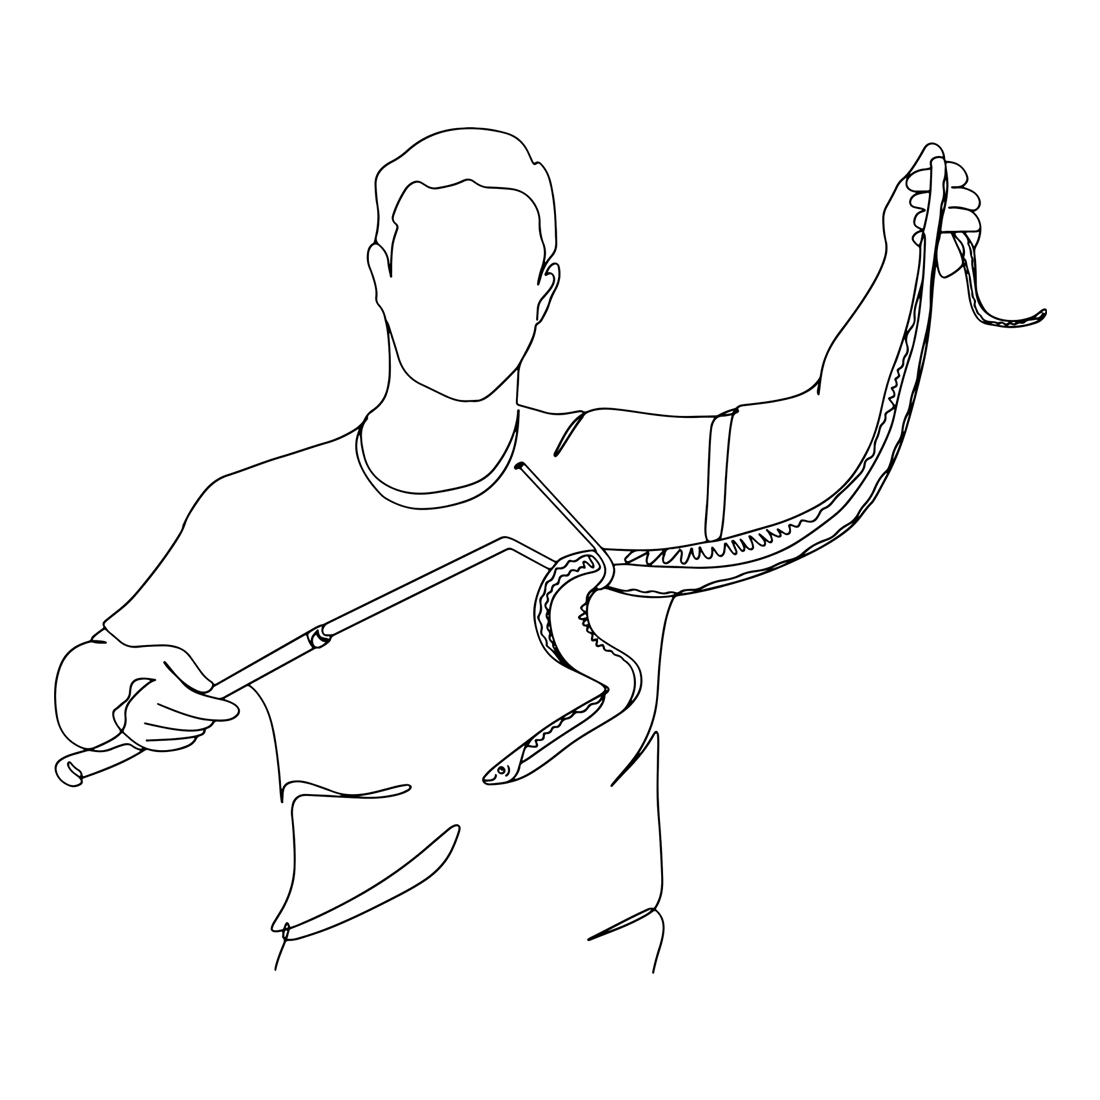 Snake Whisperer Cartoon: Professional Snake Catcher in One Line, Continuous Sketch Snake Catcher Tools: Cartoon Illustration, Professional Snake Catcher Cartoon preview image.